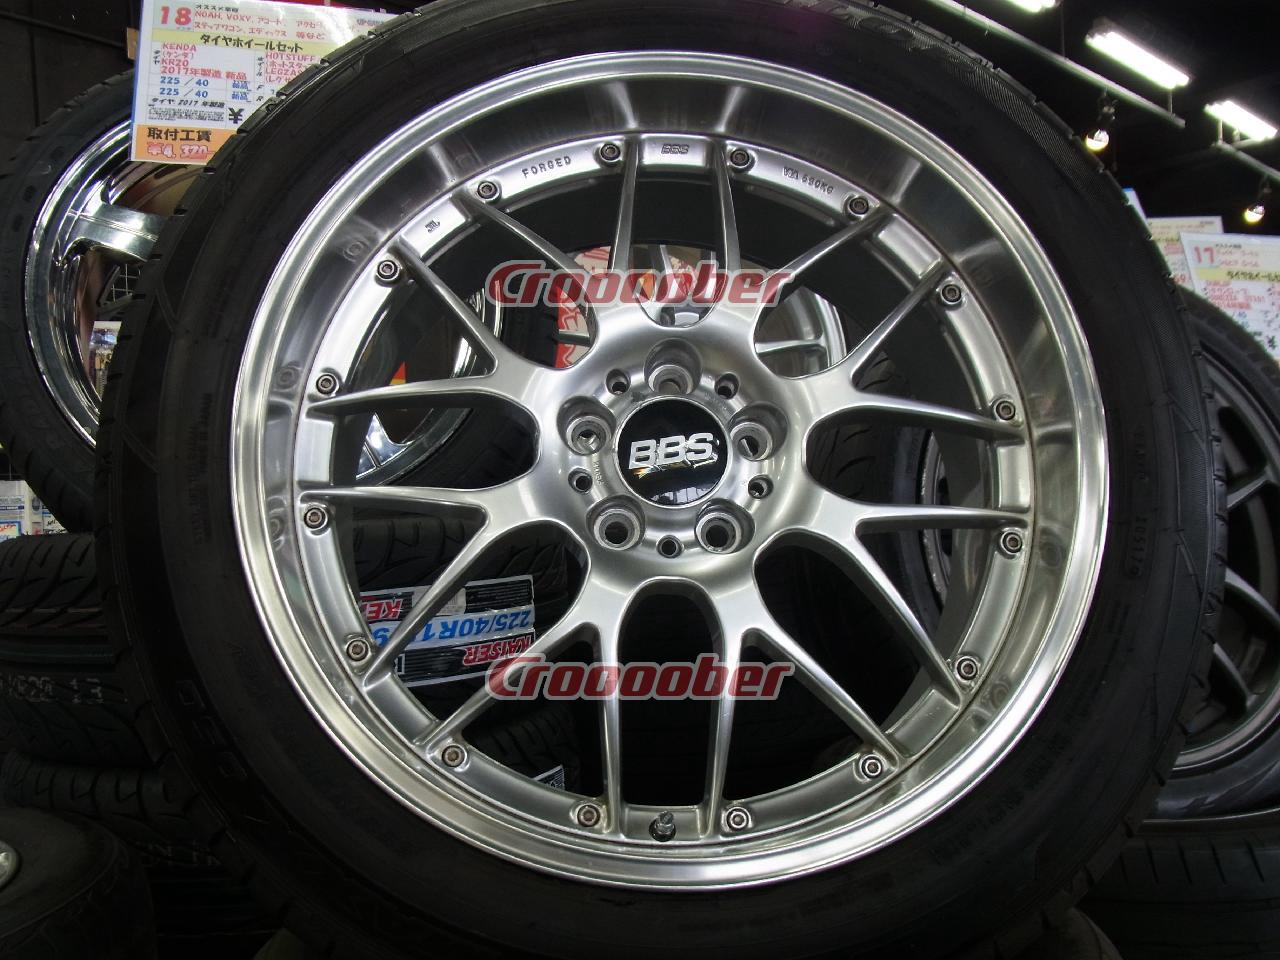 BBS BB S - ERS GT 967 / RS 968 + Dunlop SP SPORT I Was Wearing 